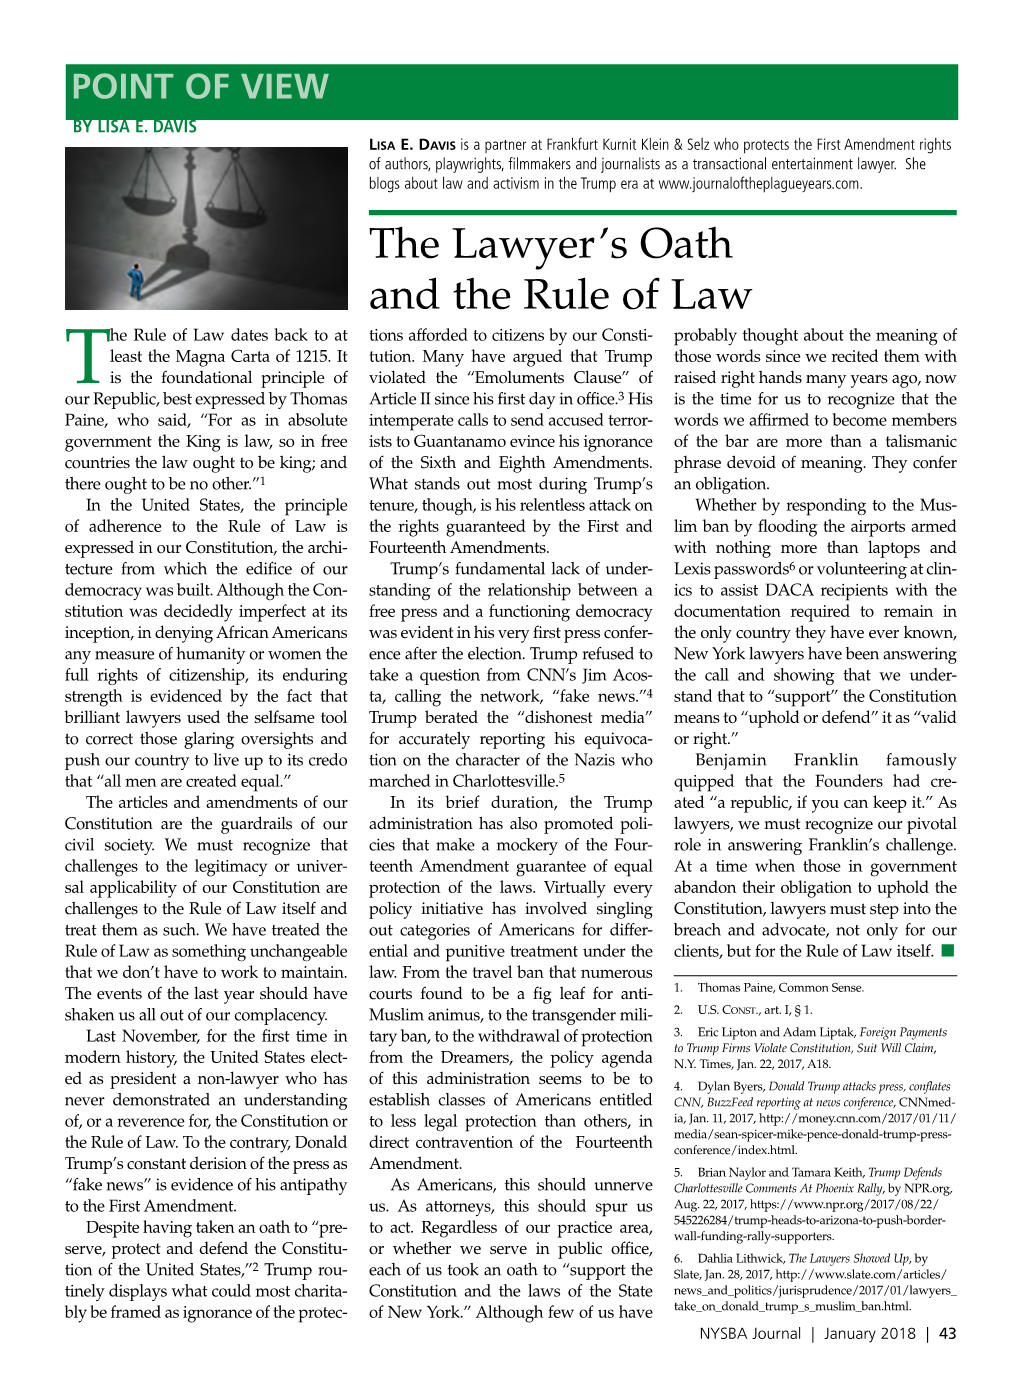 The Lawyer's Oath and the Rule Of